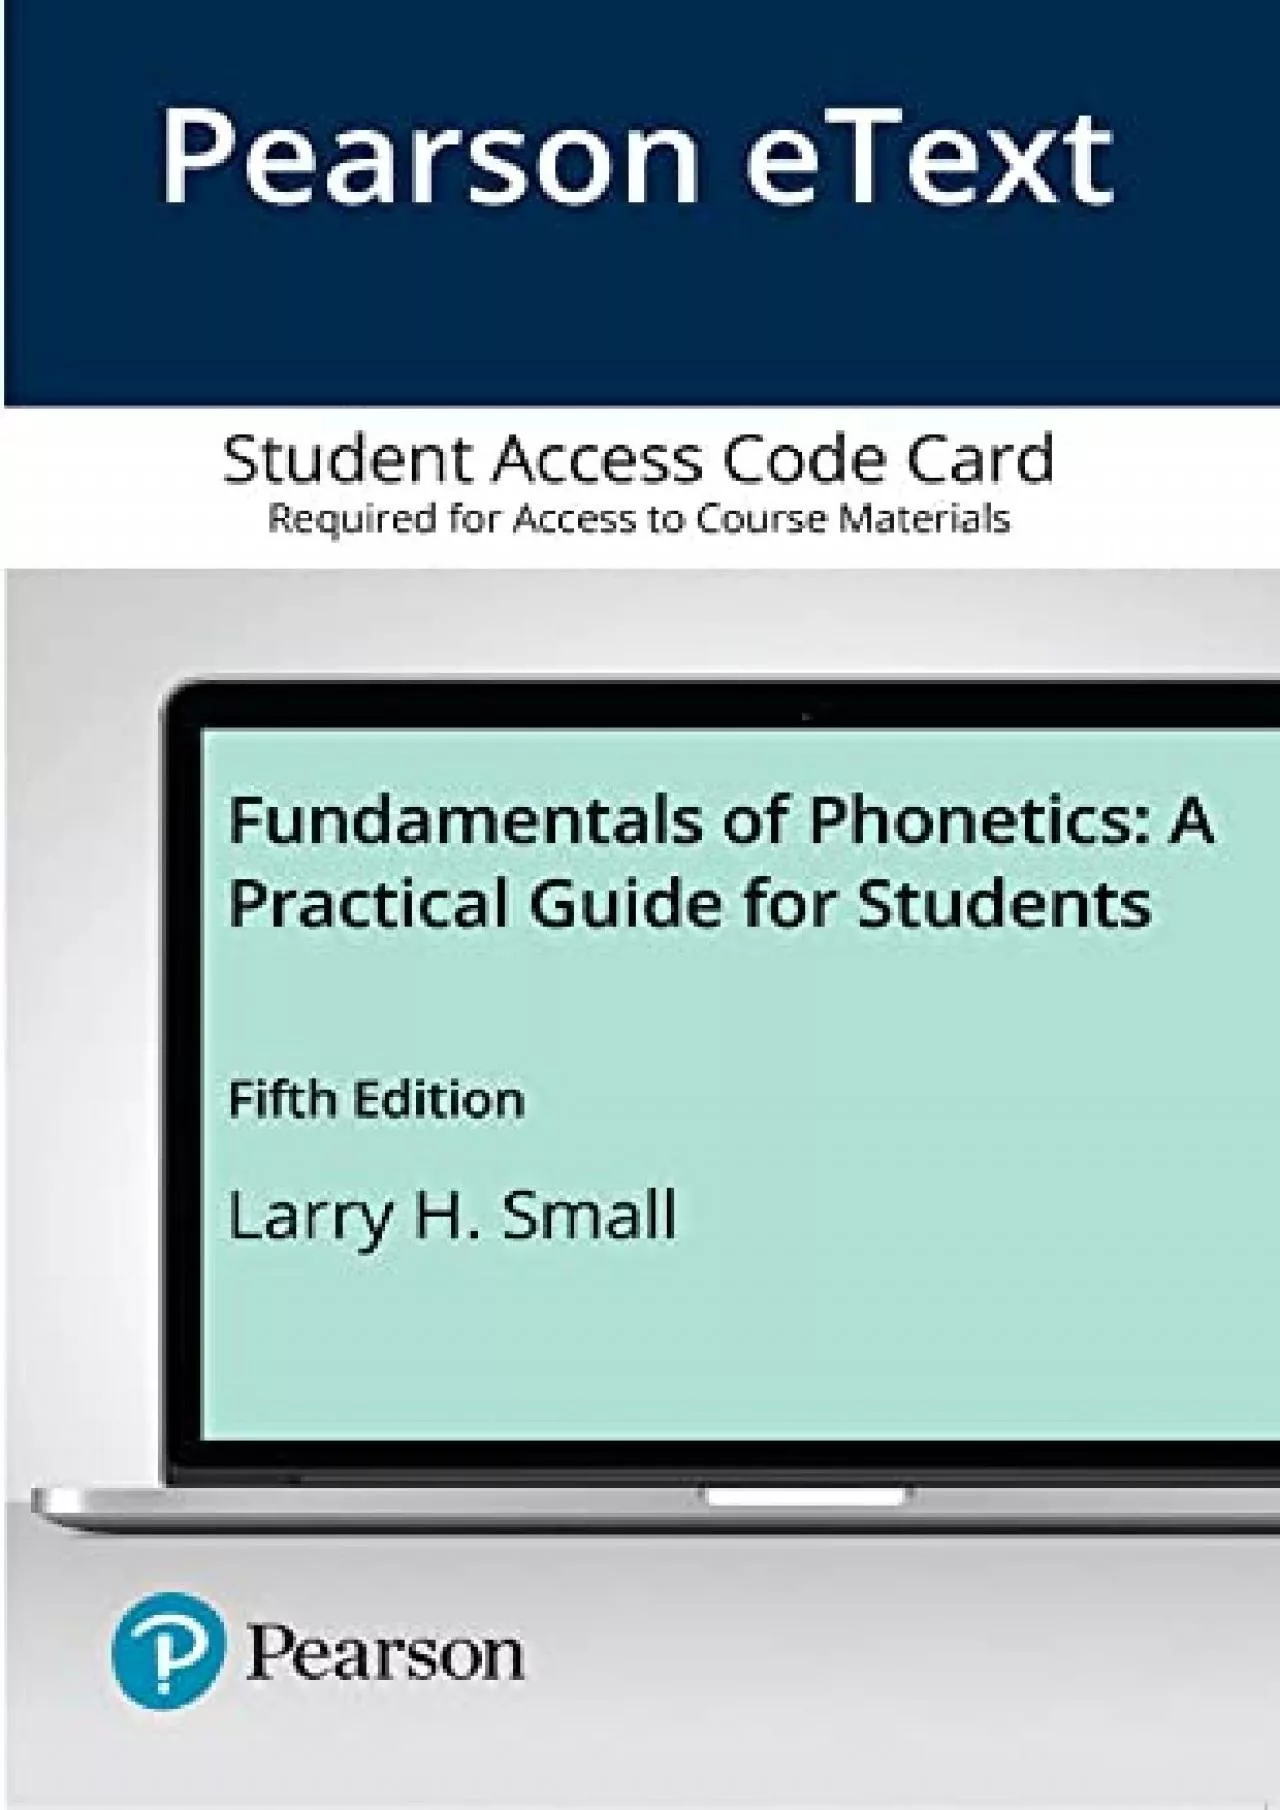 (DOWNLOAD)-Pearson eText Fundamentals of Phonetics: A Practical Guide for Students --